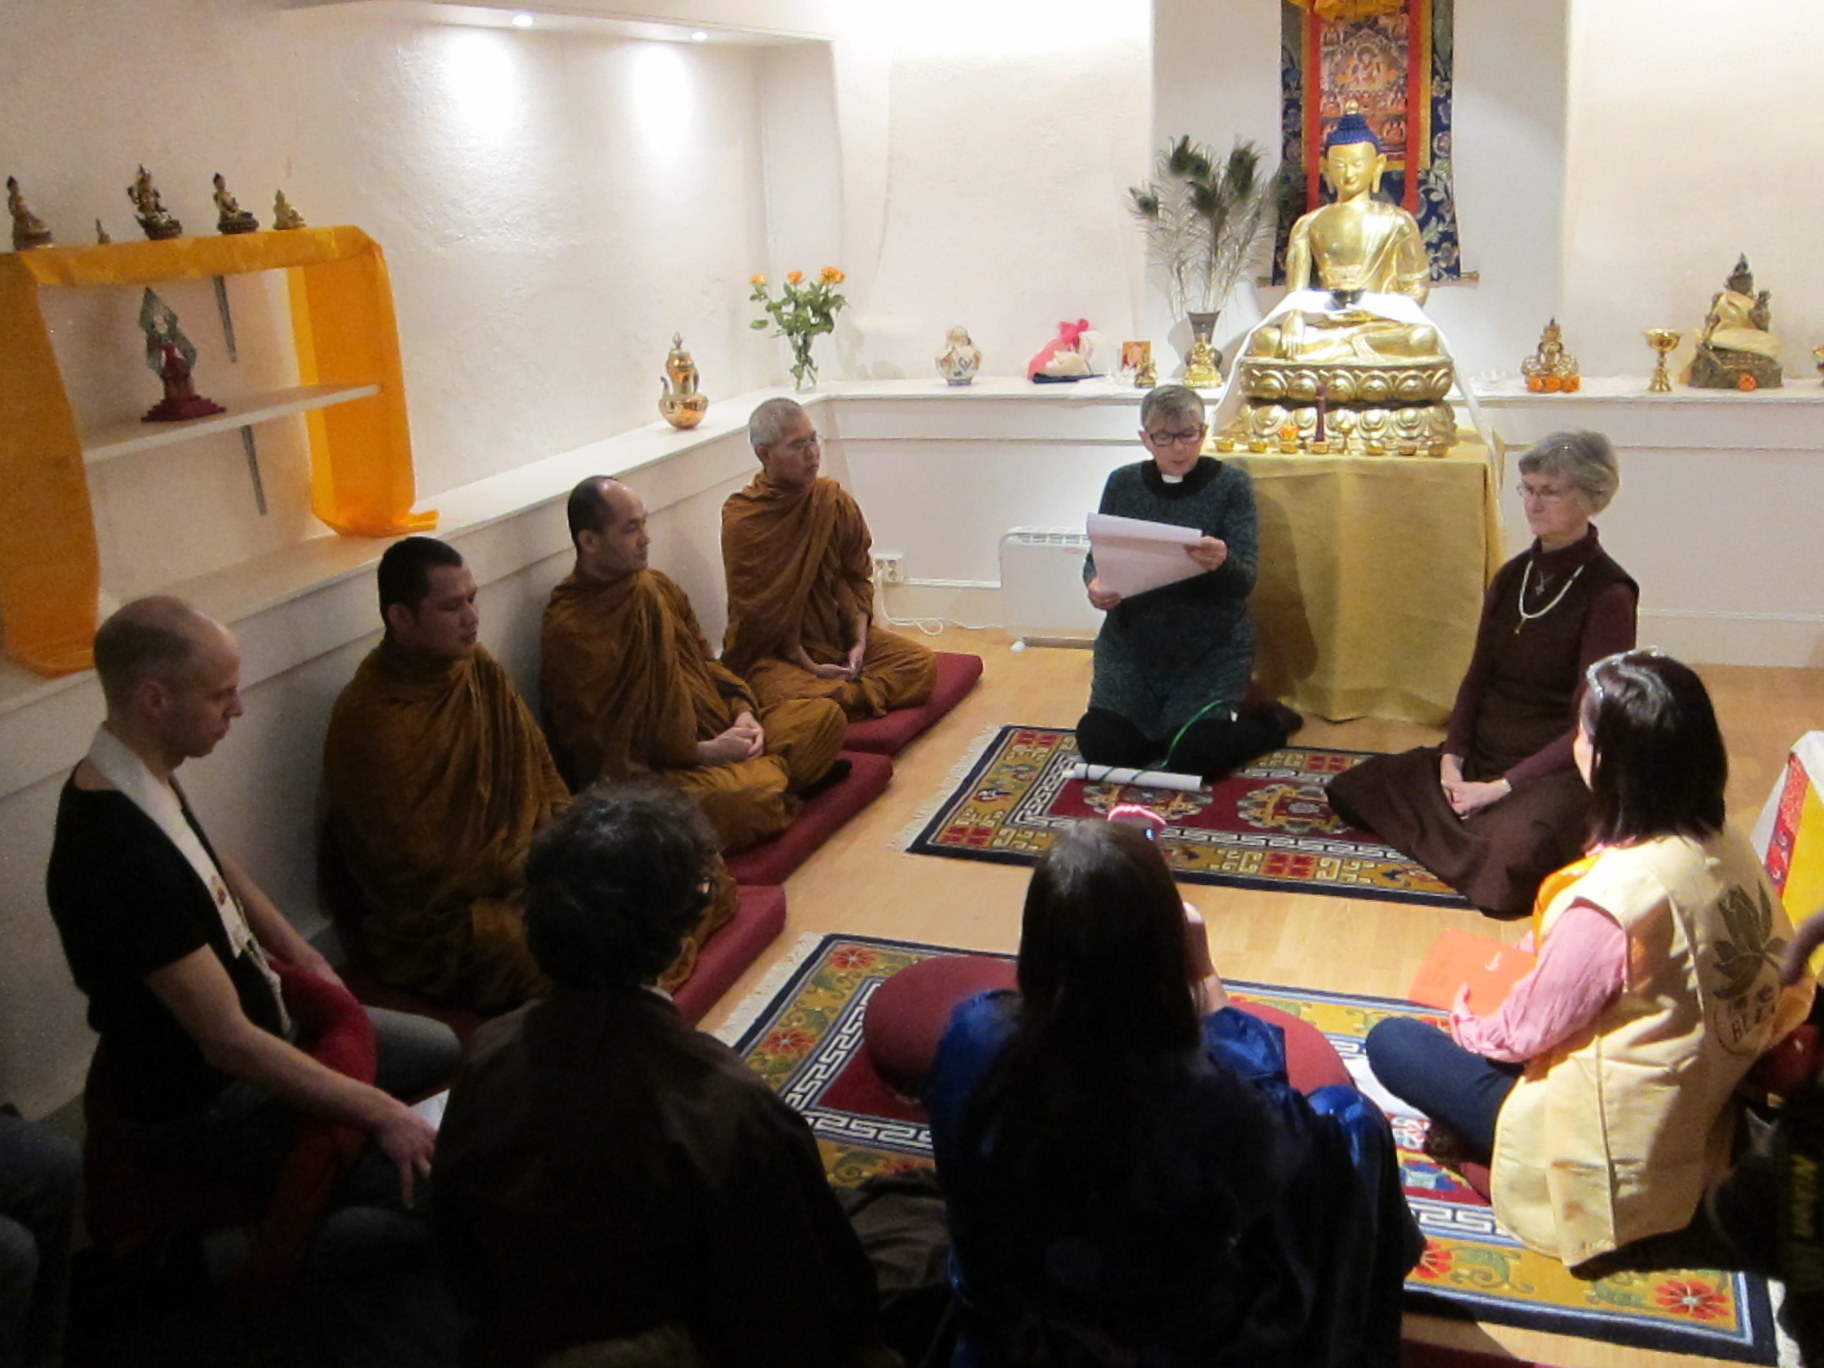 Peace gathering organised by The Buddhist Cooperation Council of Sweden